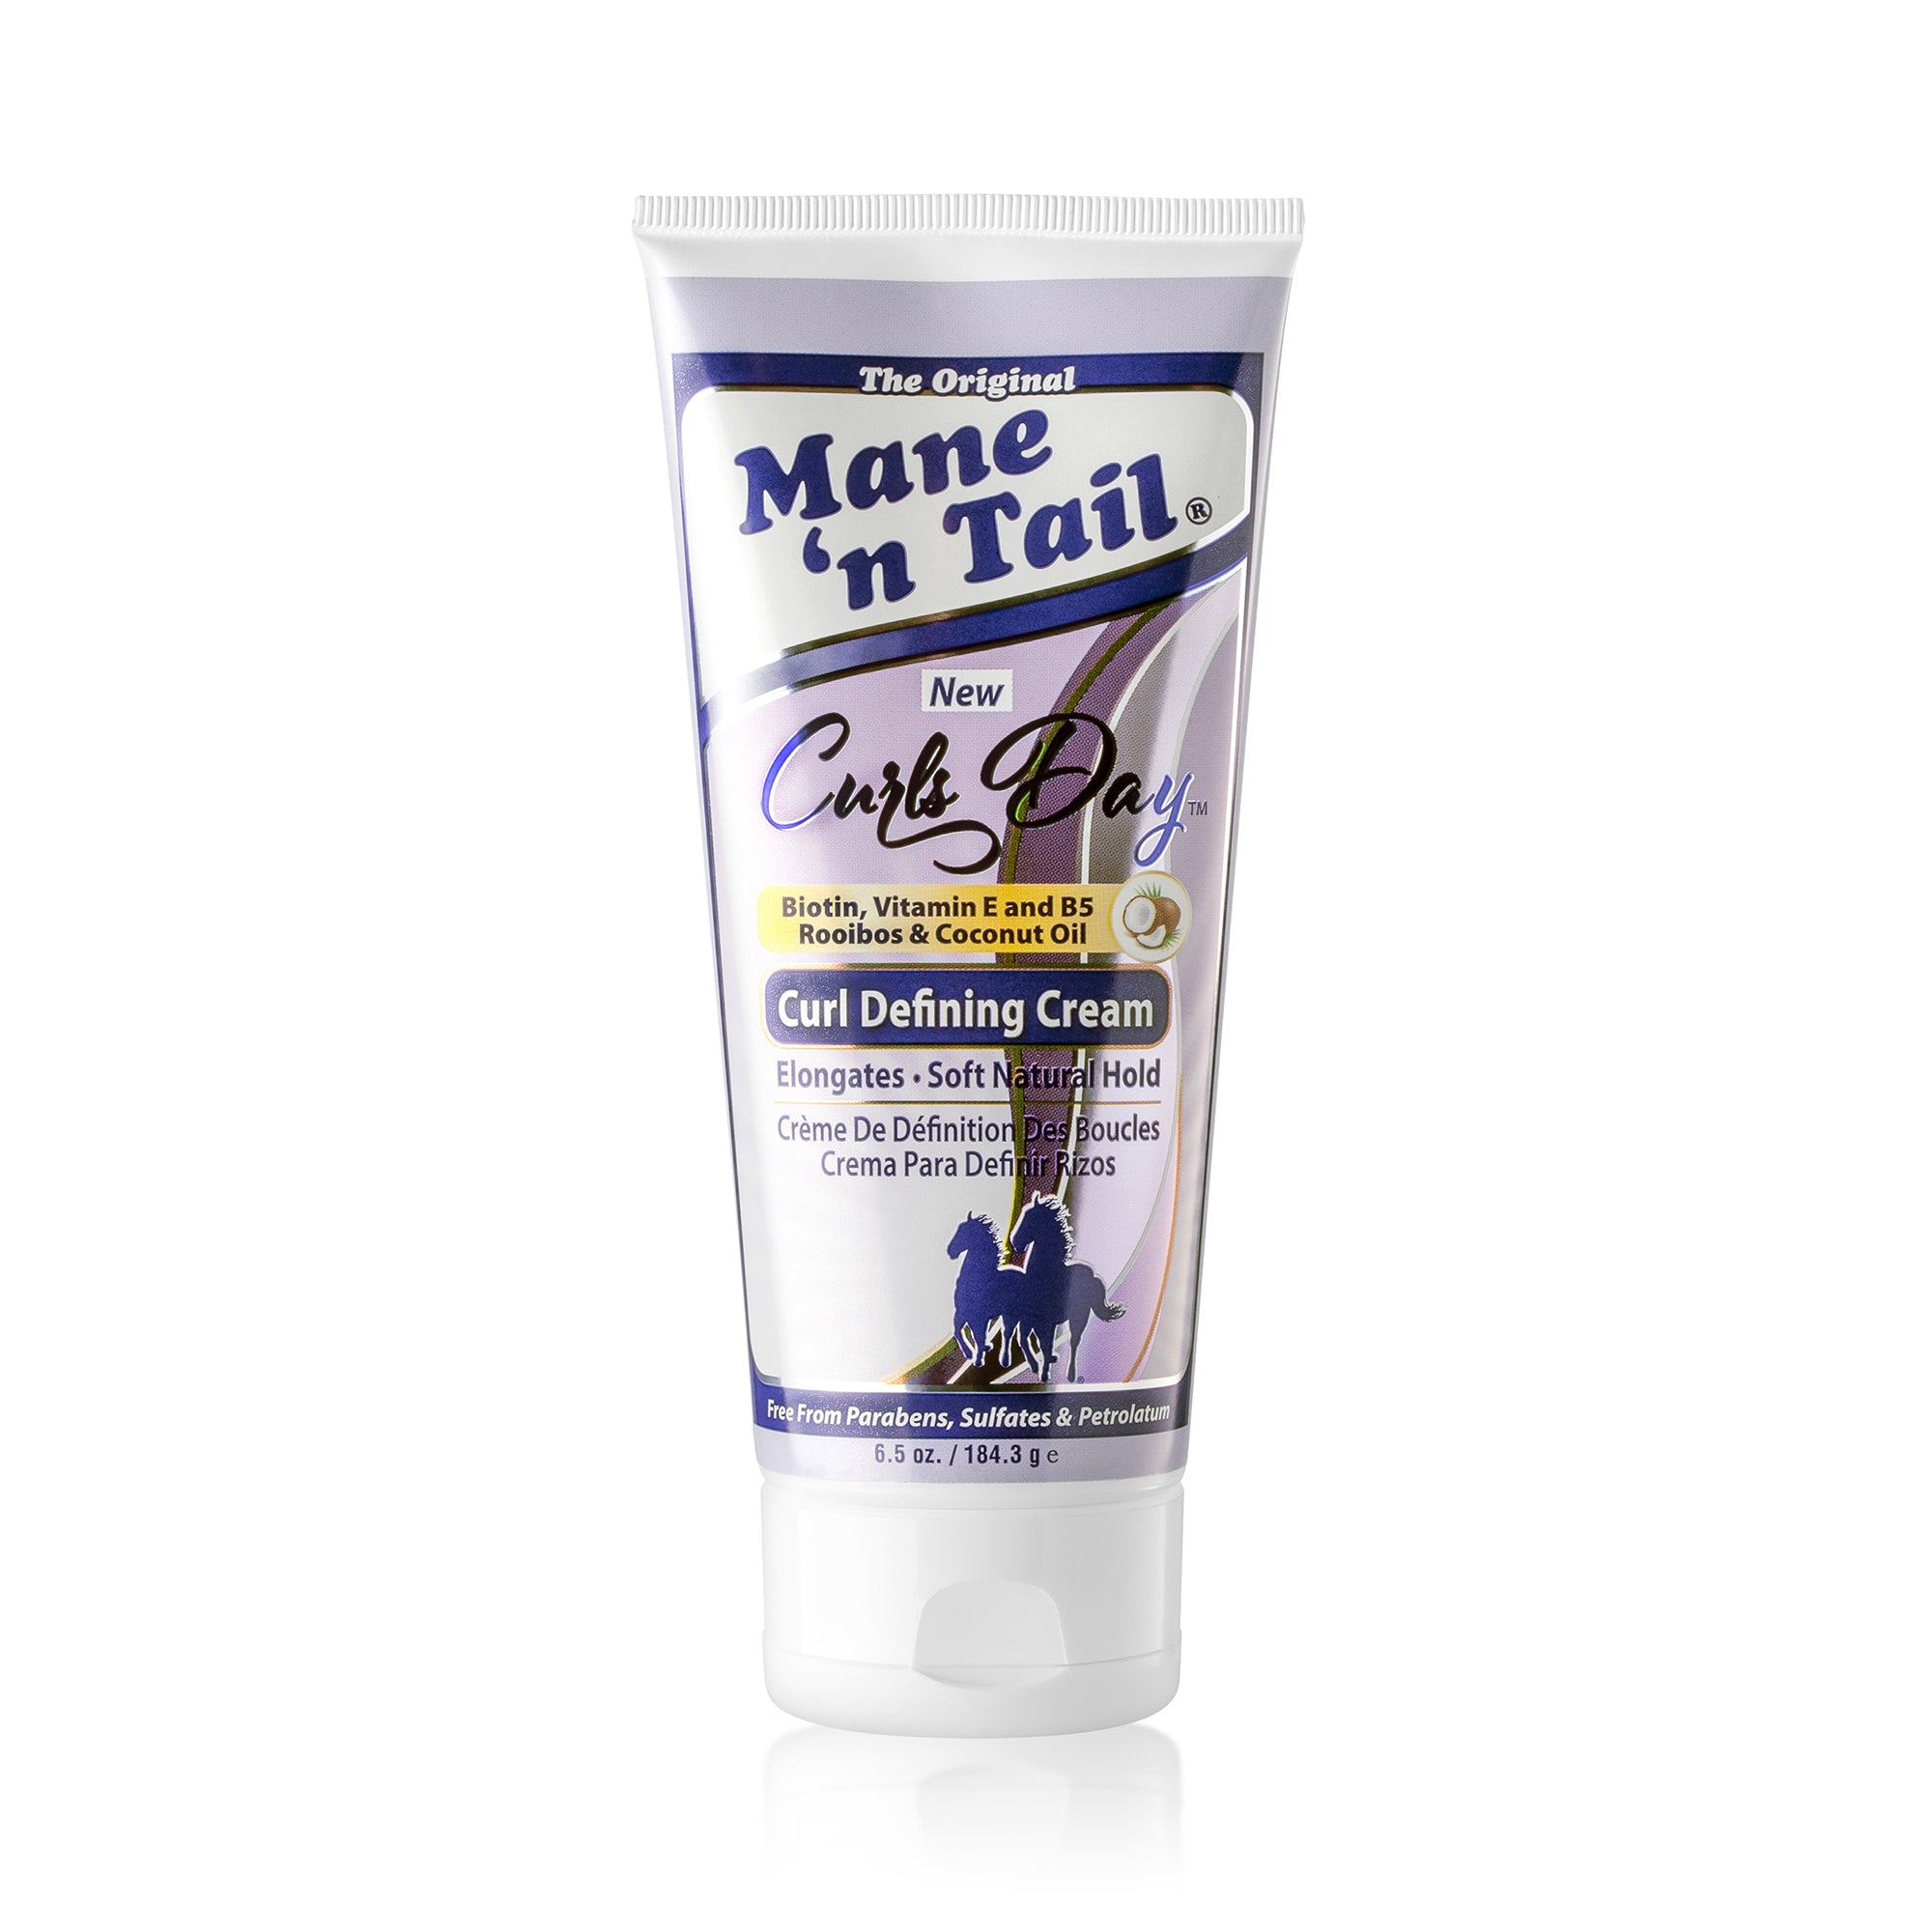 MnT Curls Day Curl Defining Lotion 6.5 oz image 1